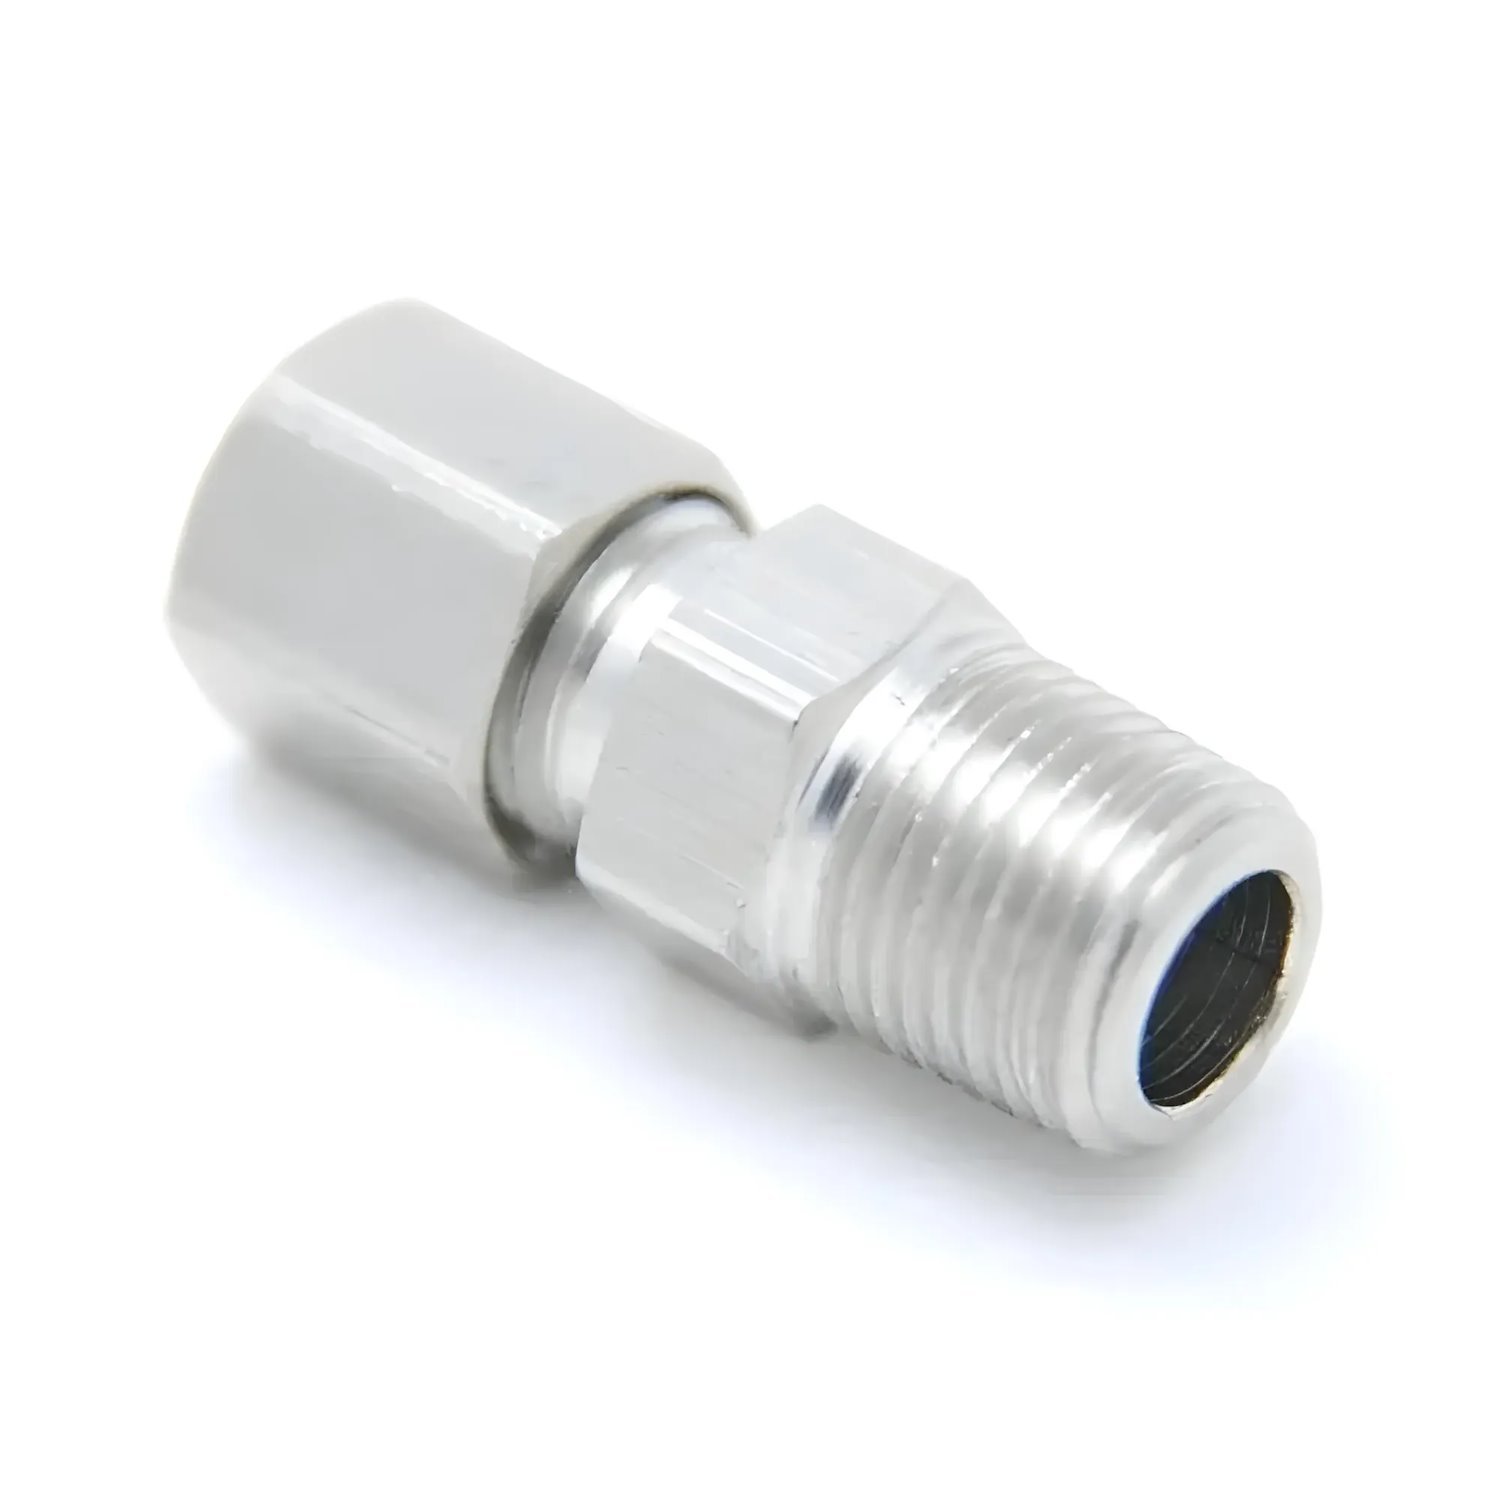 00-01500-B 1/8 in. NPT Male x 3/16 in. Compression Fitting